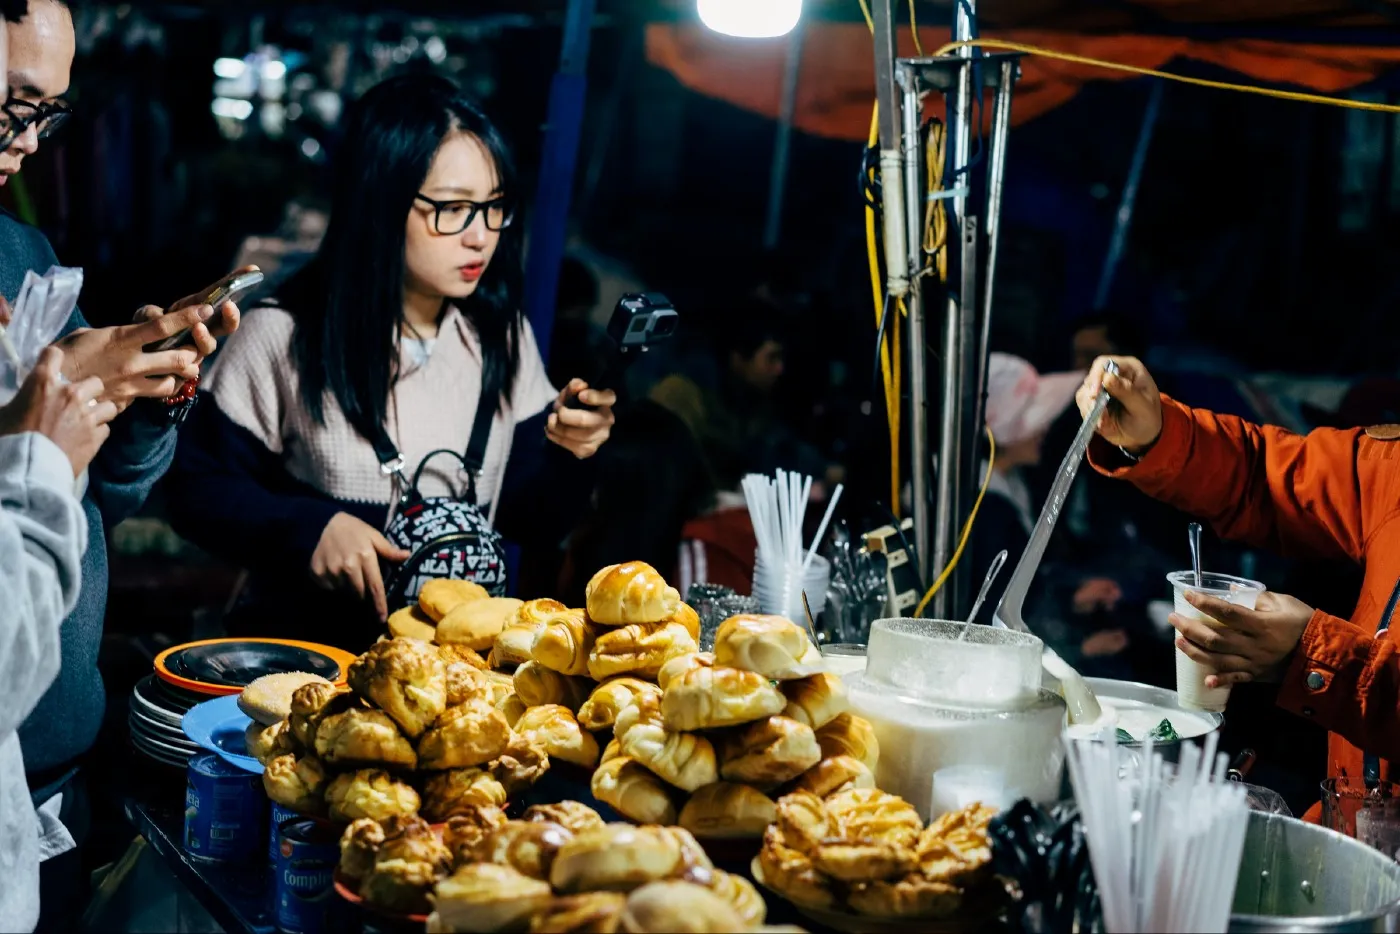 Enjoy a variety of street food day and night